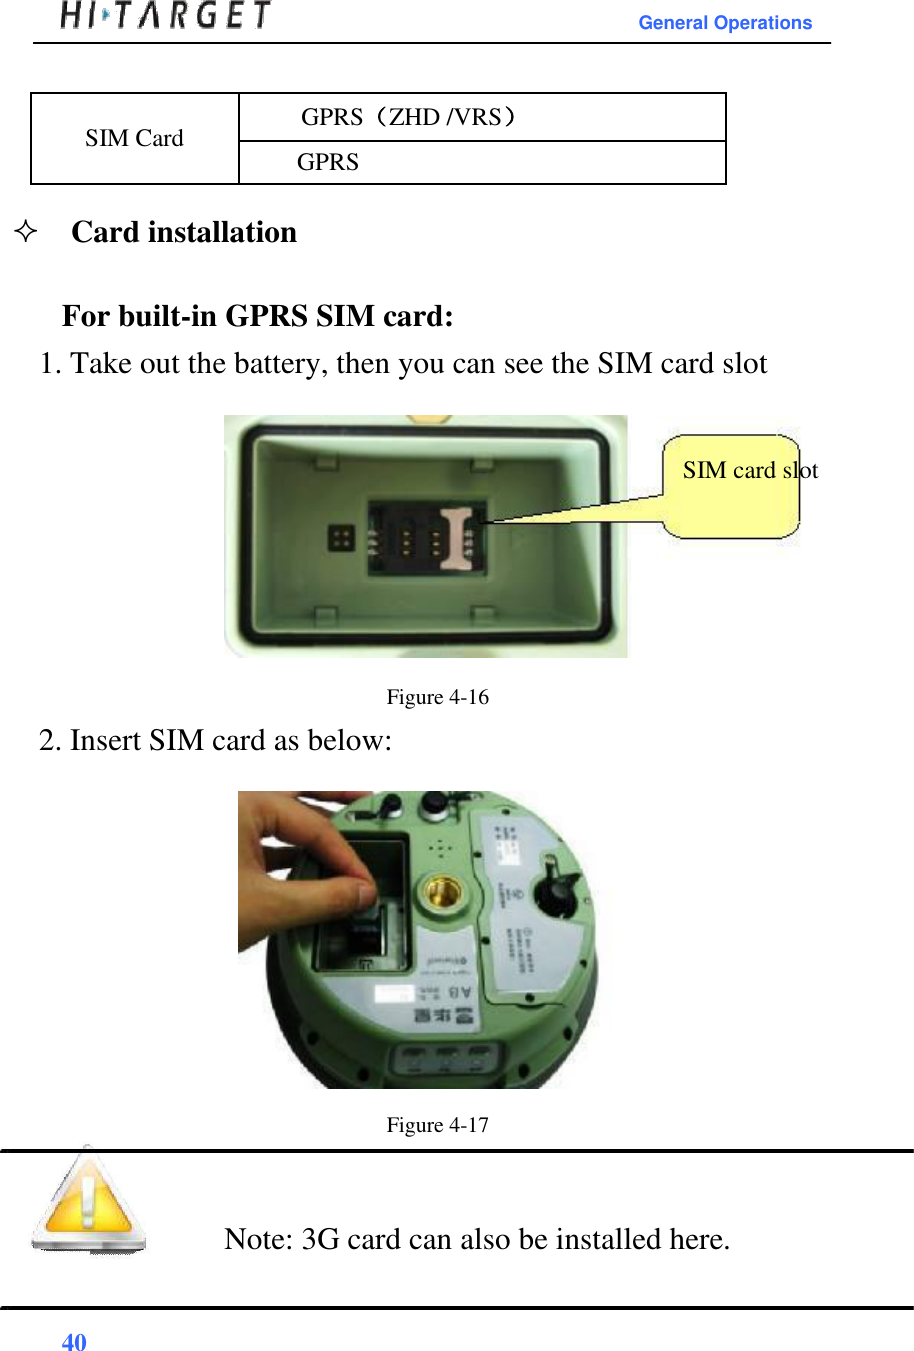 General Operations   SIM Card  GPRS（ZHD /VRS） GPRS  Card installation   For built-in GPRS SIM card:  1. Take out the battery, then you can see the SIM card slot    SIM card slot         Figure 4-16  2. Insert SIM card as below:                  Figure 4-17    Note: 3G card can also be installed here.    40  